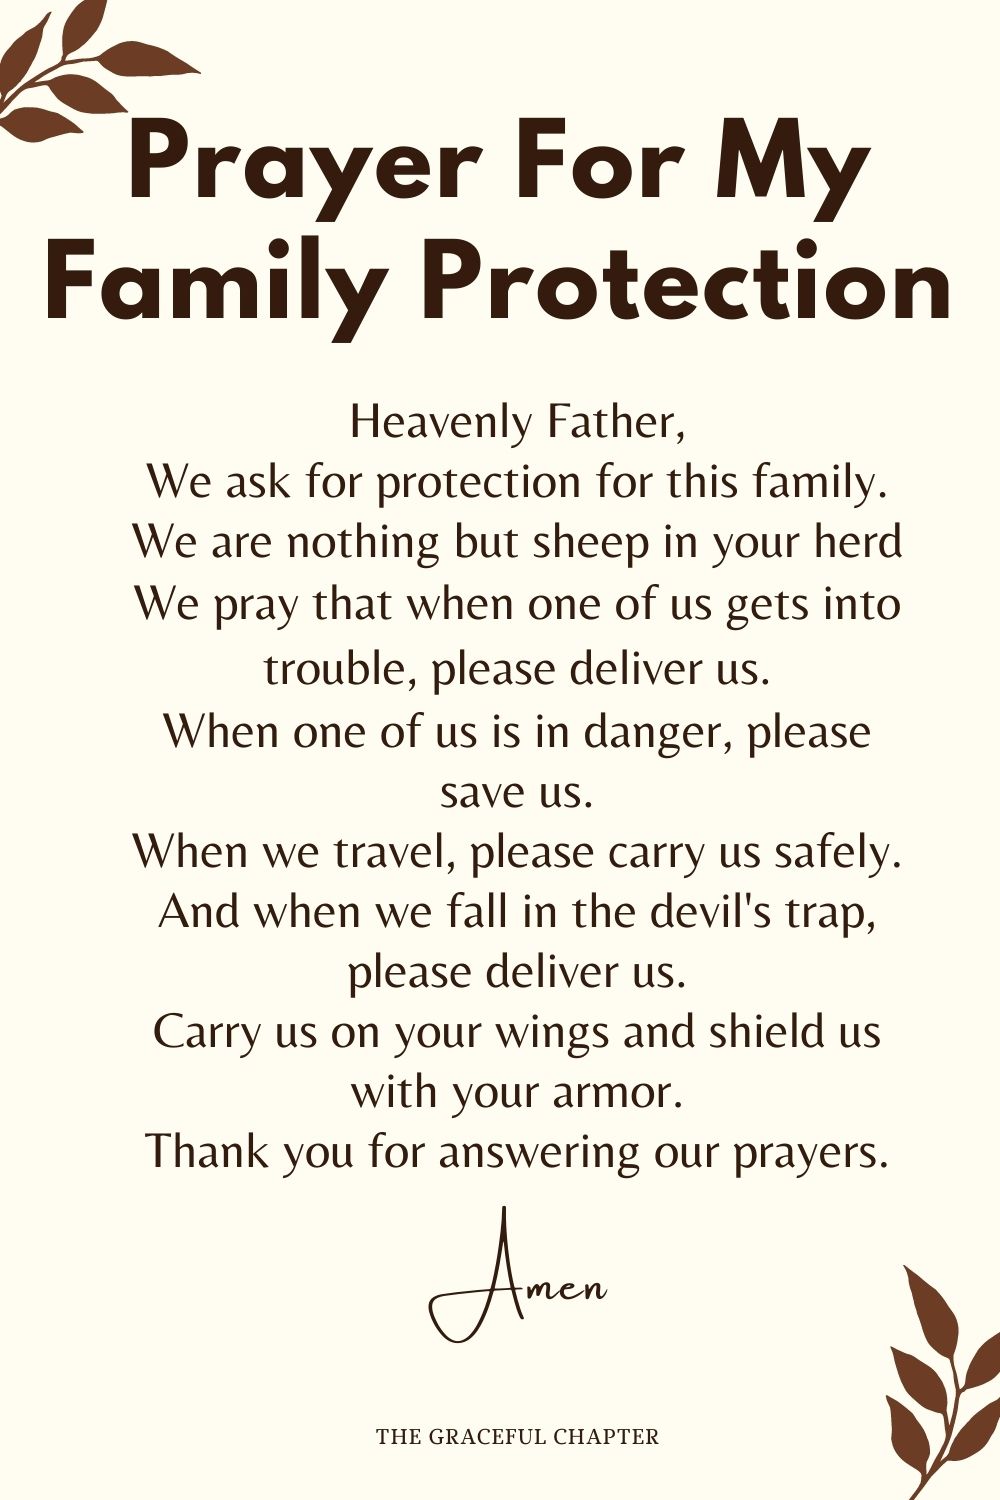 Prayer for Family Protection - prayers for your family